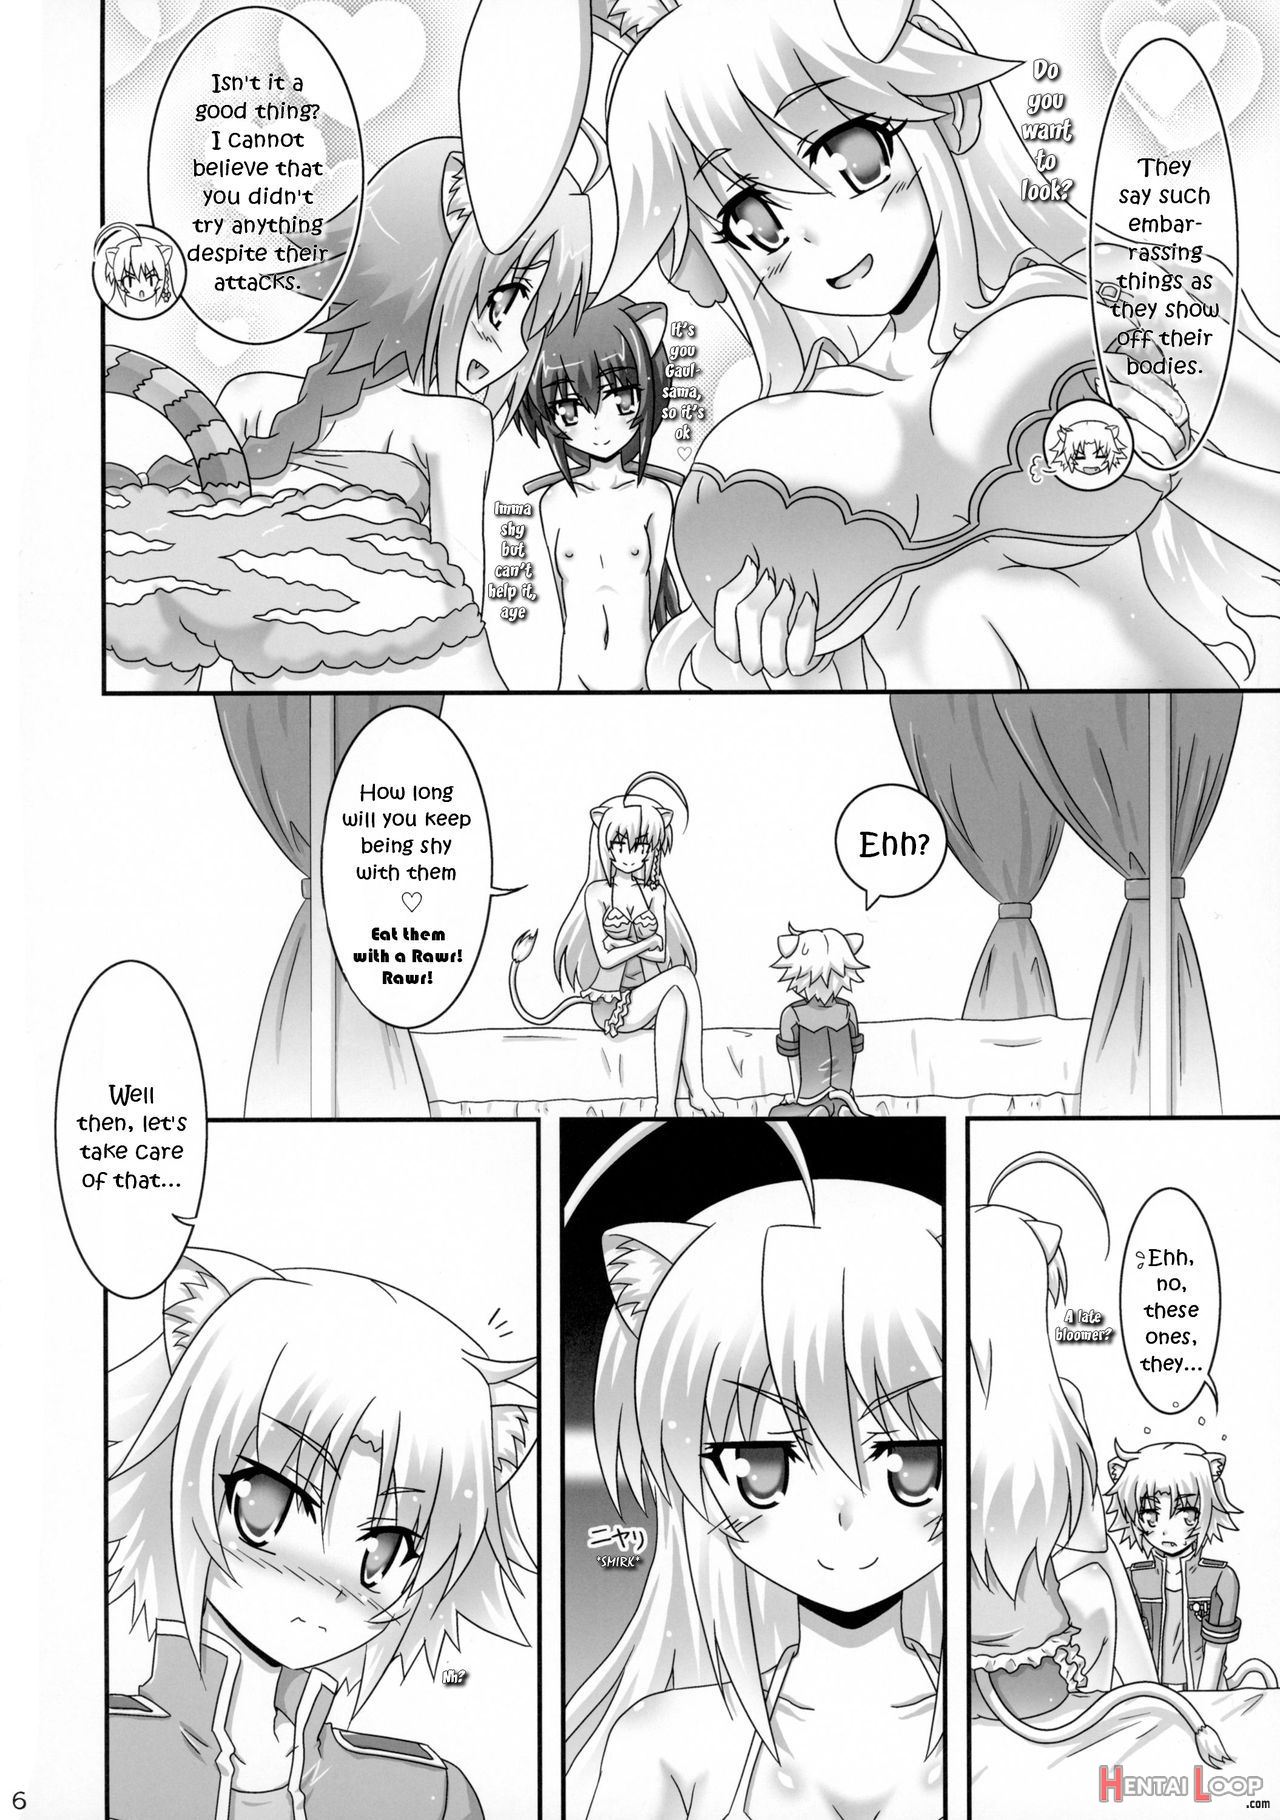 Leave It To Big Sister page 6